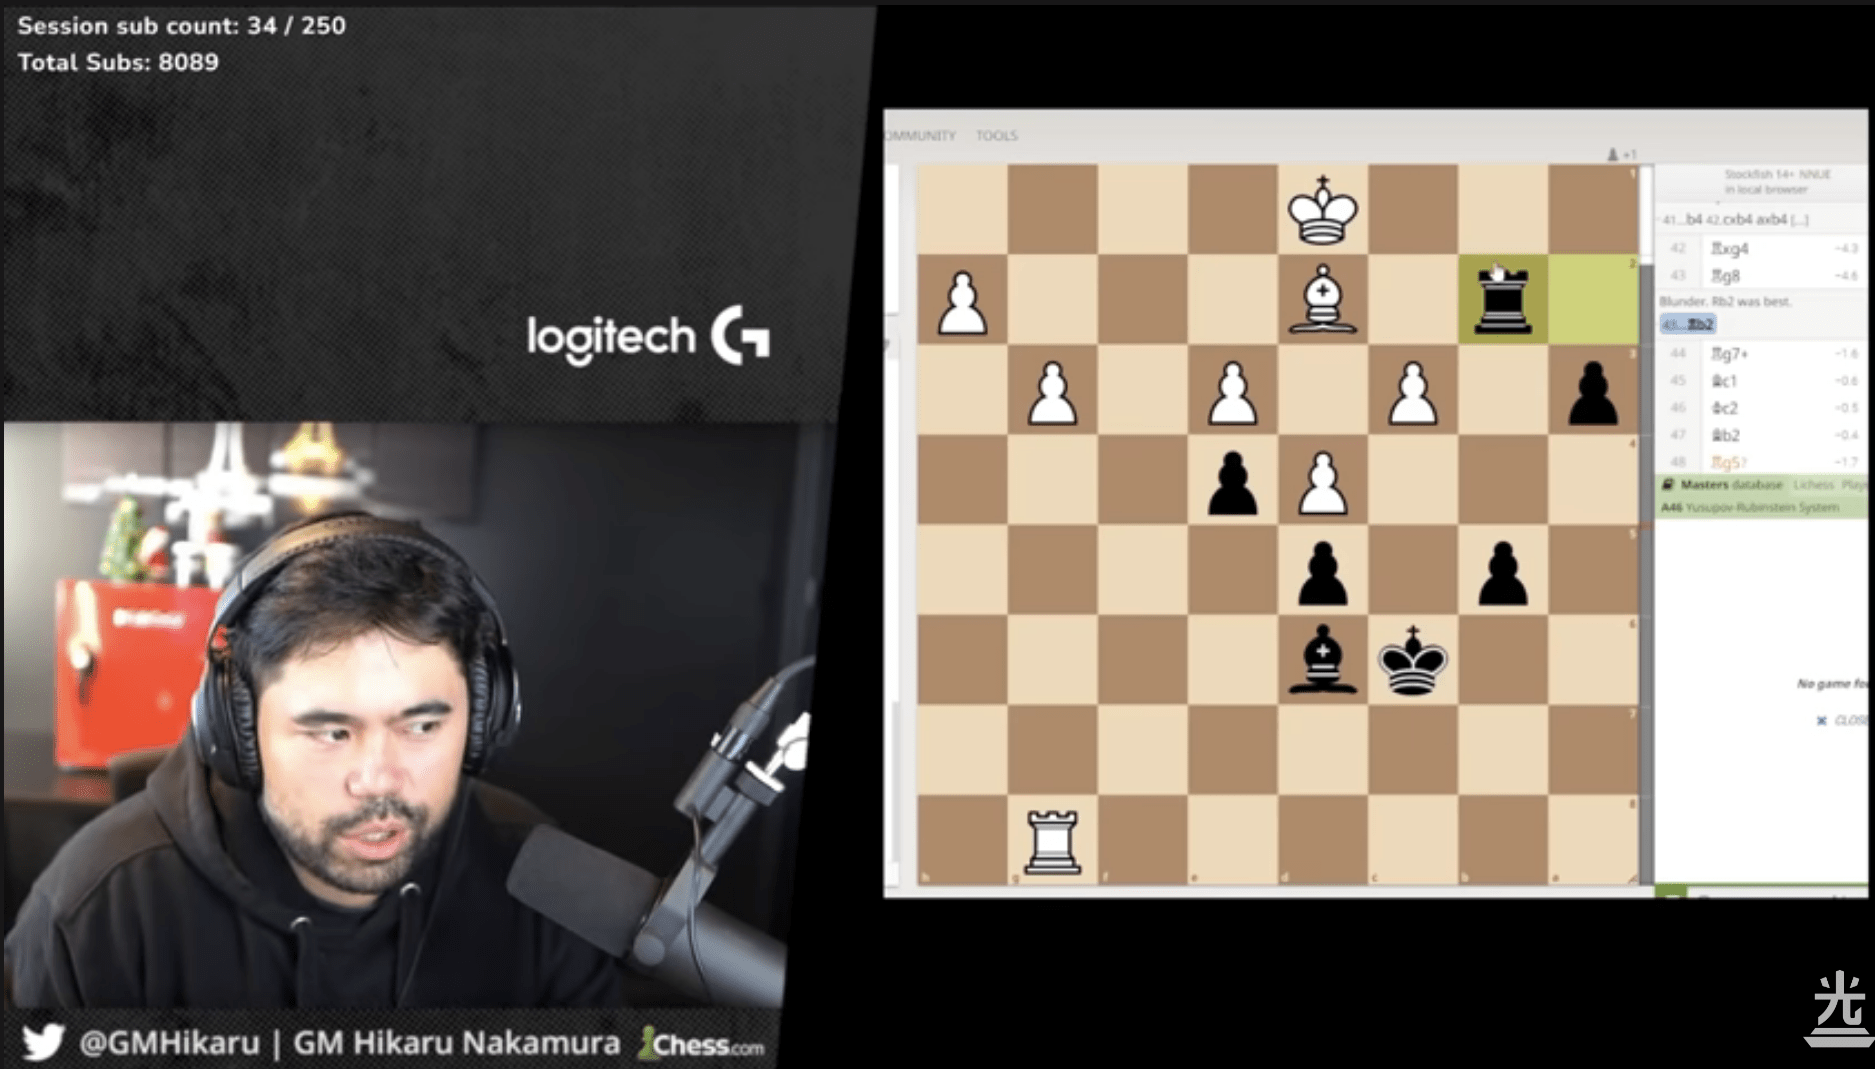 MUST WATCH (LOL MEANING) - Chess Forums 